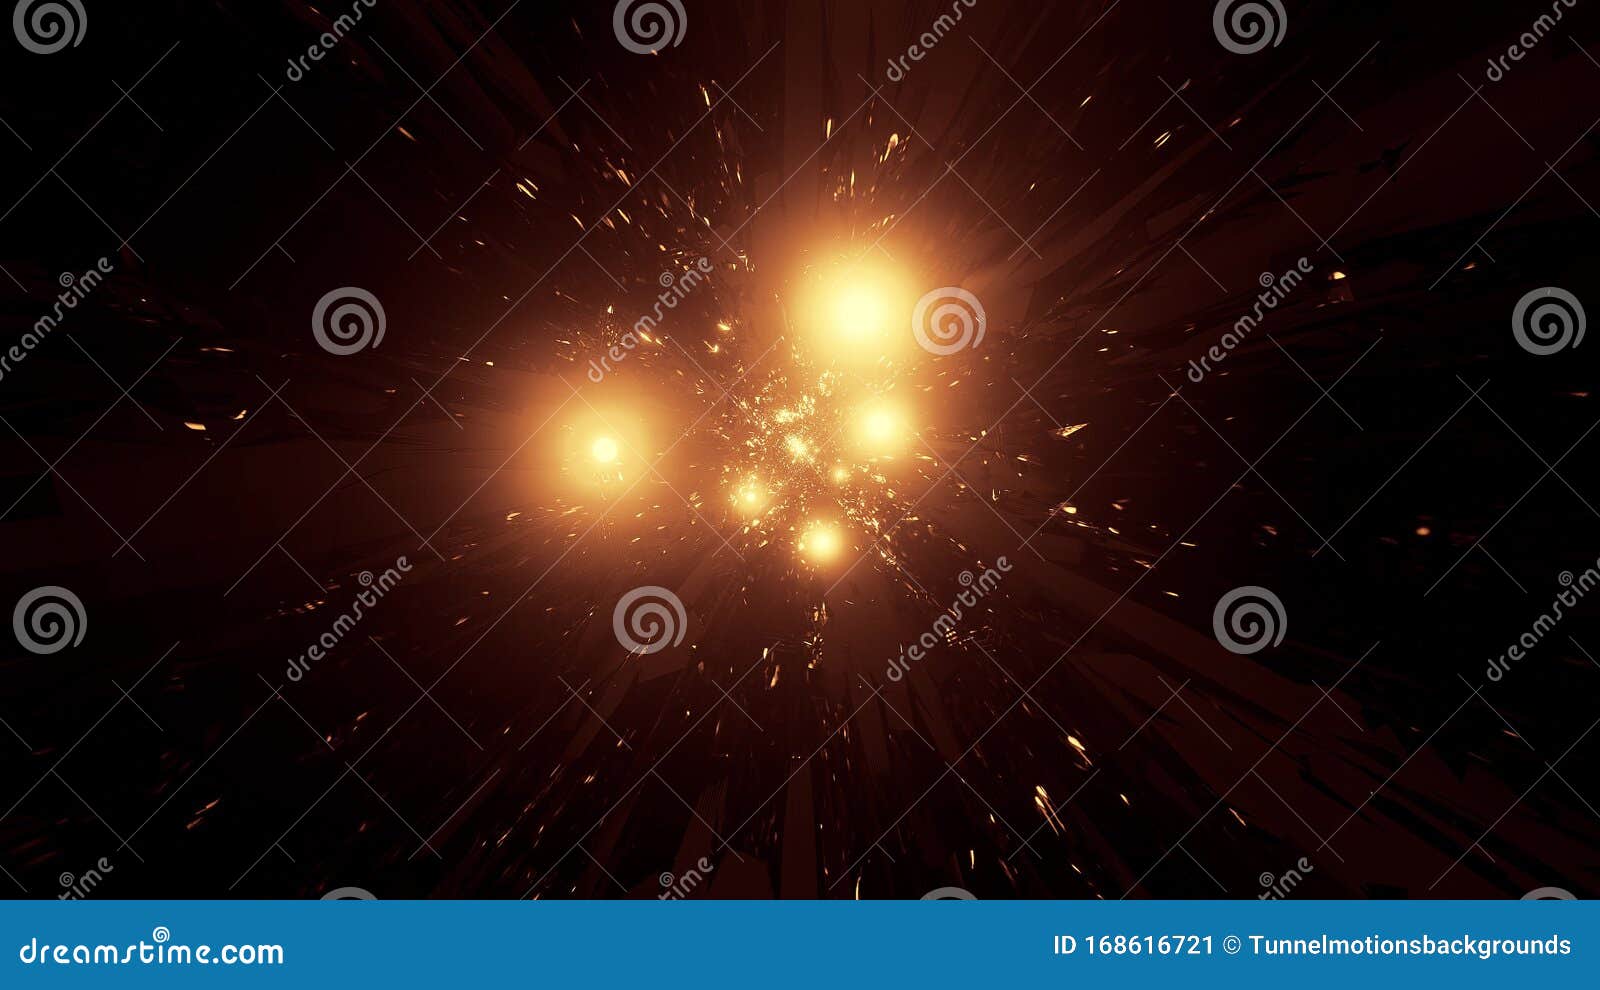 Abstract Space Galaxy Tunnel With Glowing Sphere Planets 3d